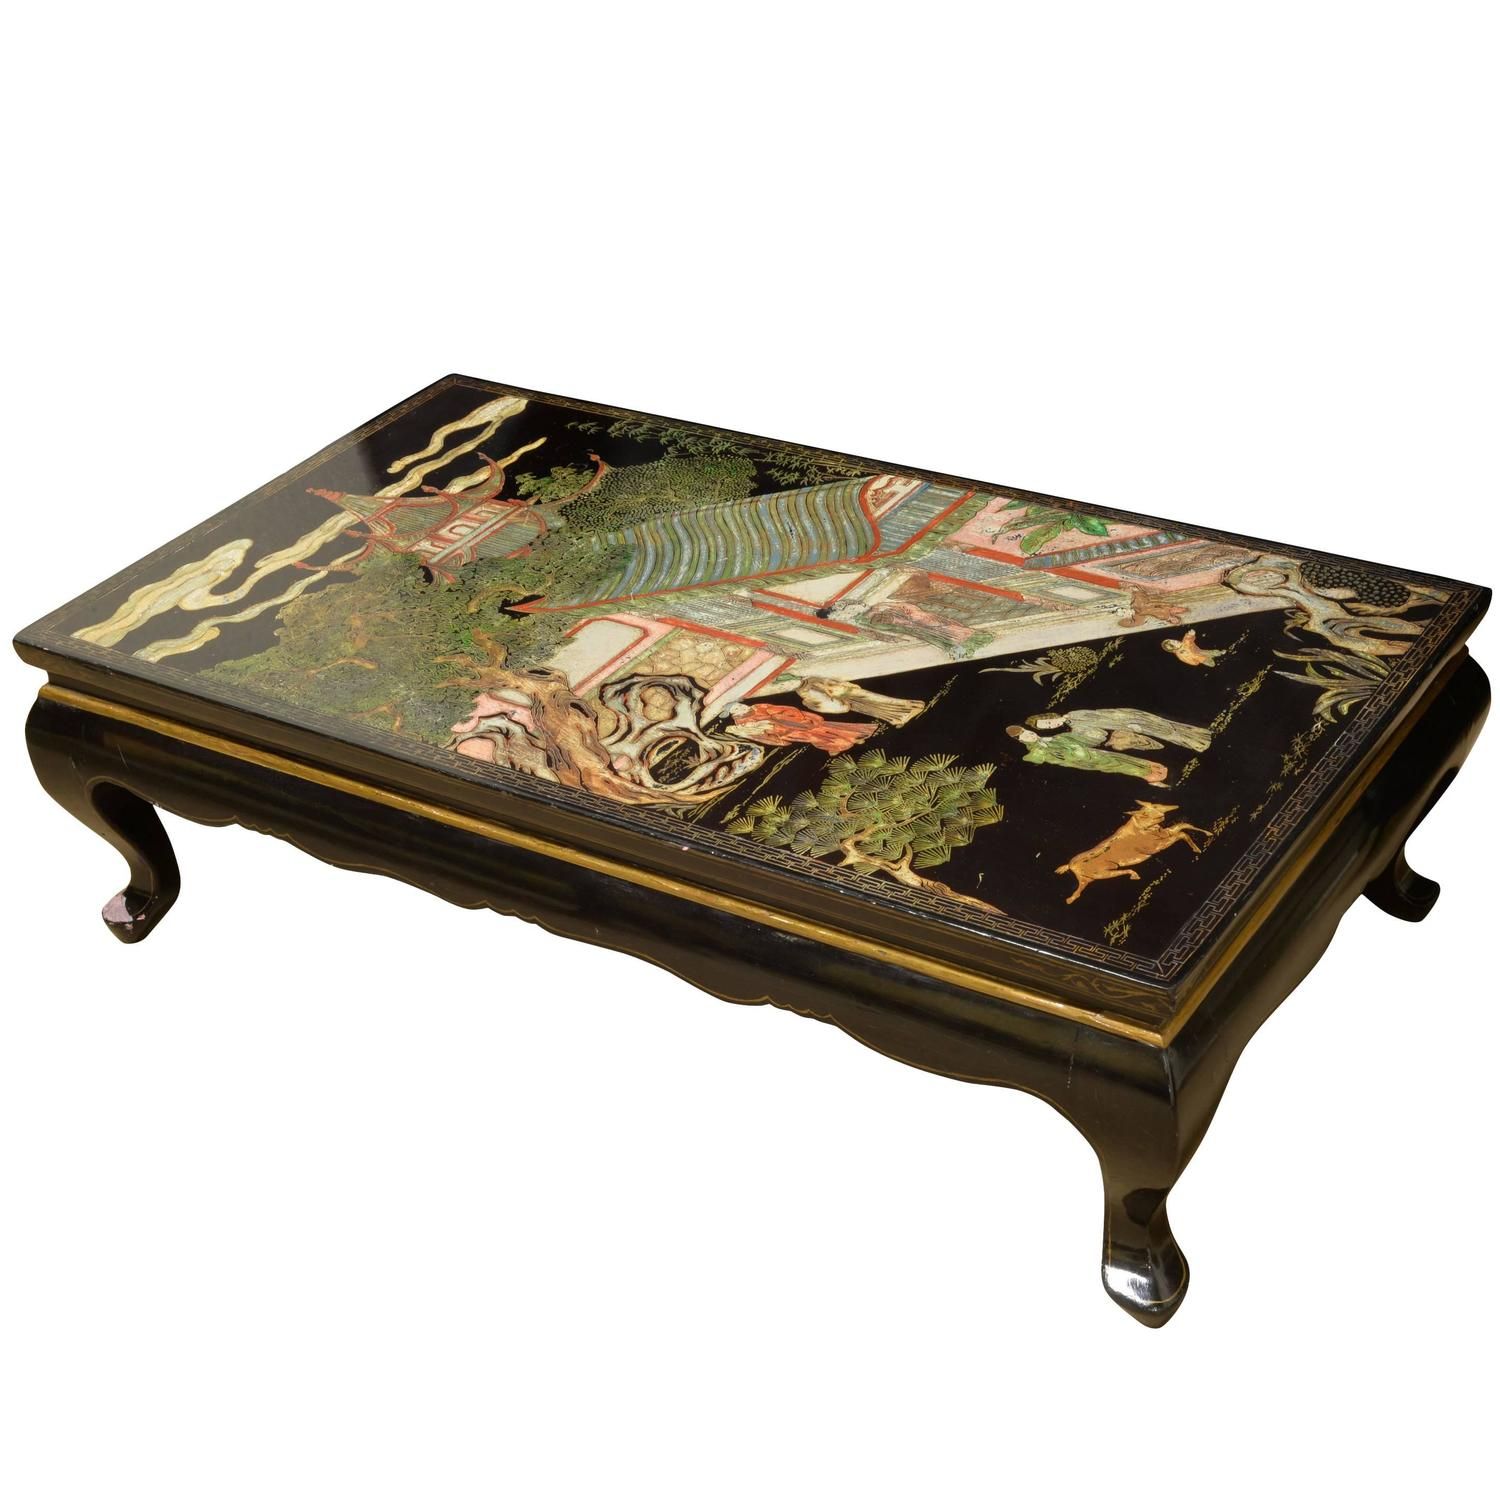 Oriental Black Lacquer Coffee Table At 1stdibs Pertaining To Antique White Black Coffee Tables (View 8 of 15)